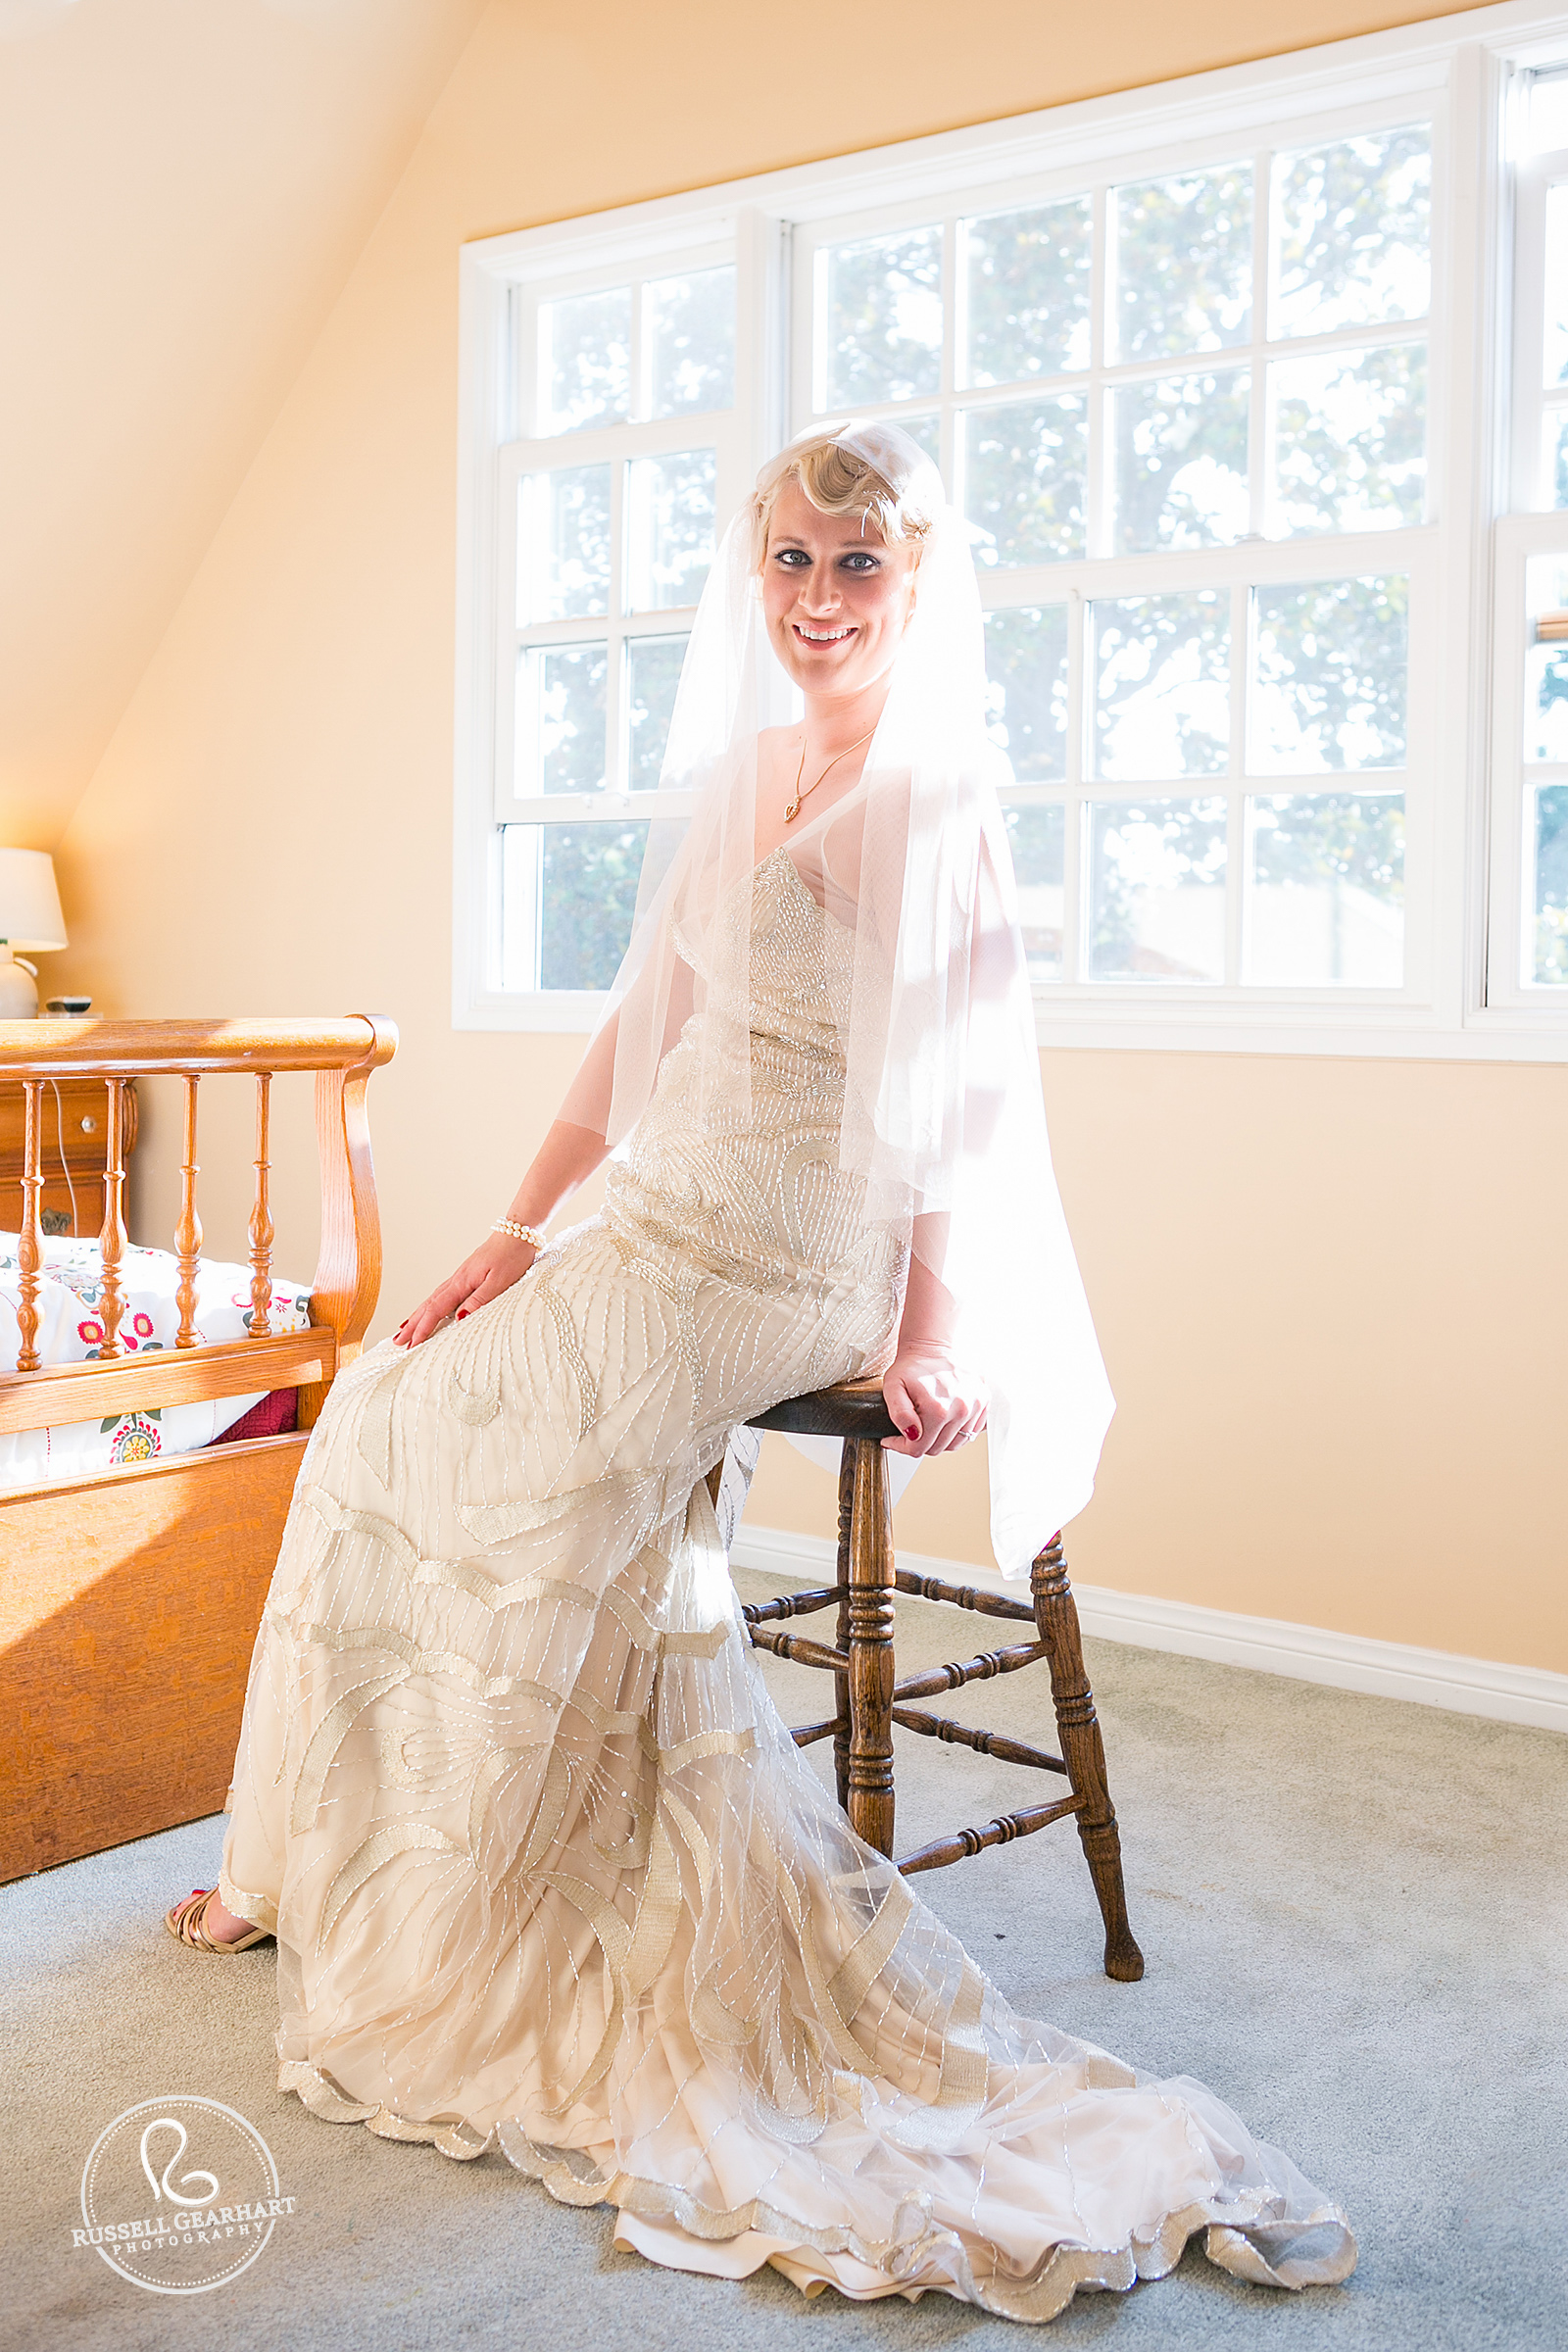 Vintage Bride in Beaded Dress by Maggie Sottero - Twenties Themed California Wedding – Russell Gearhart Photography – www.gearhartphoto.com